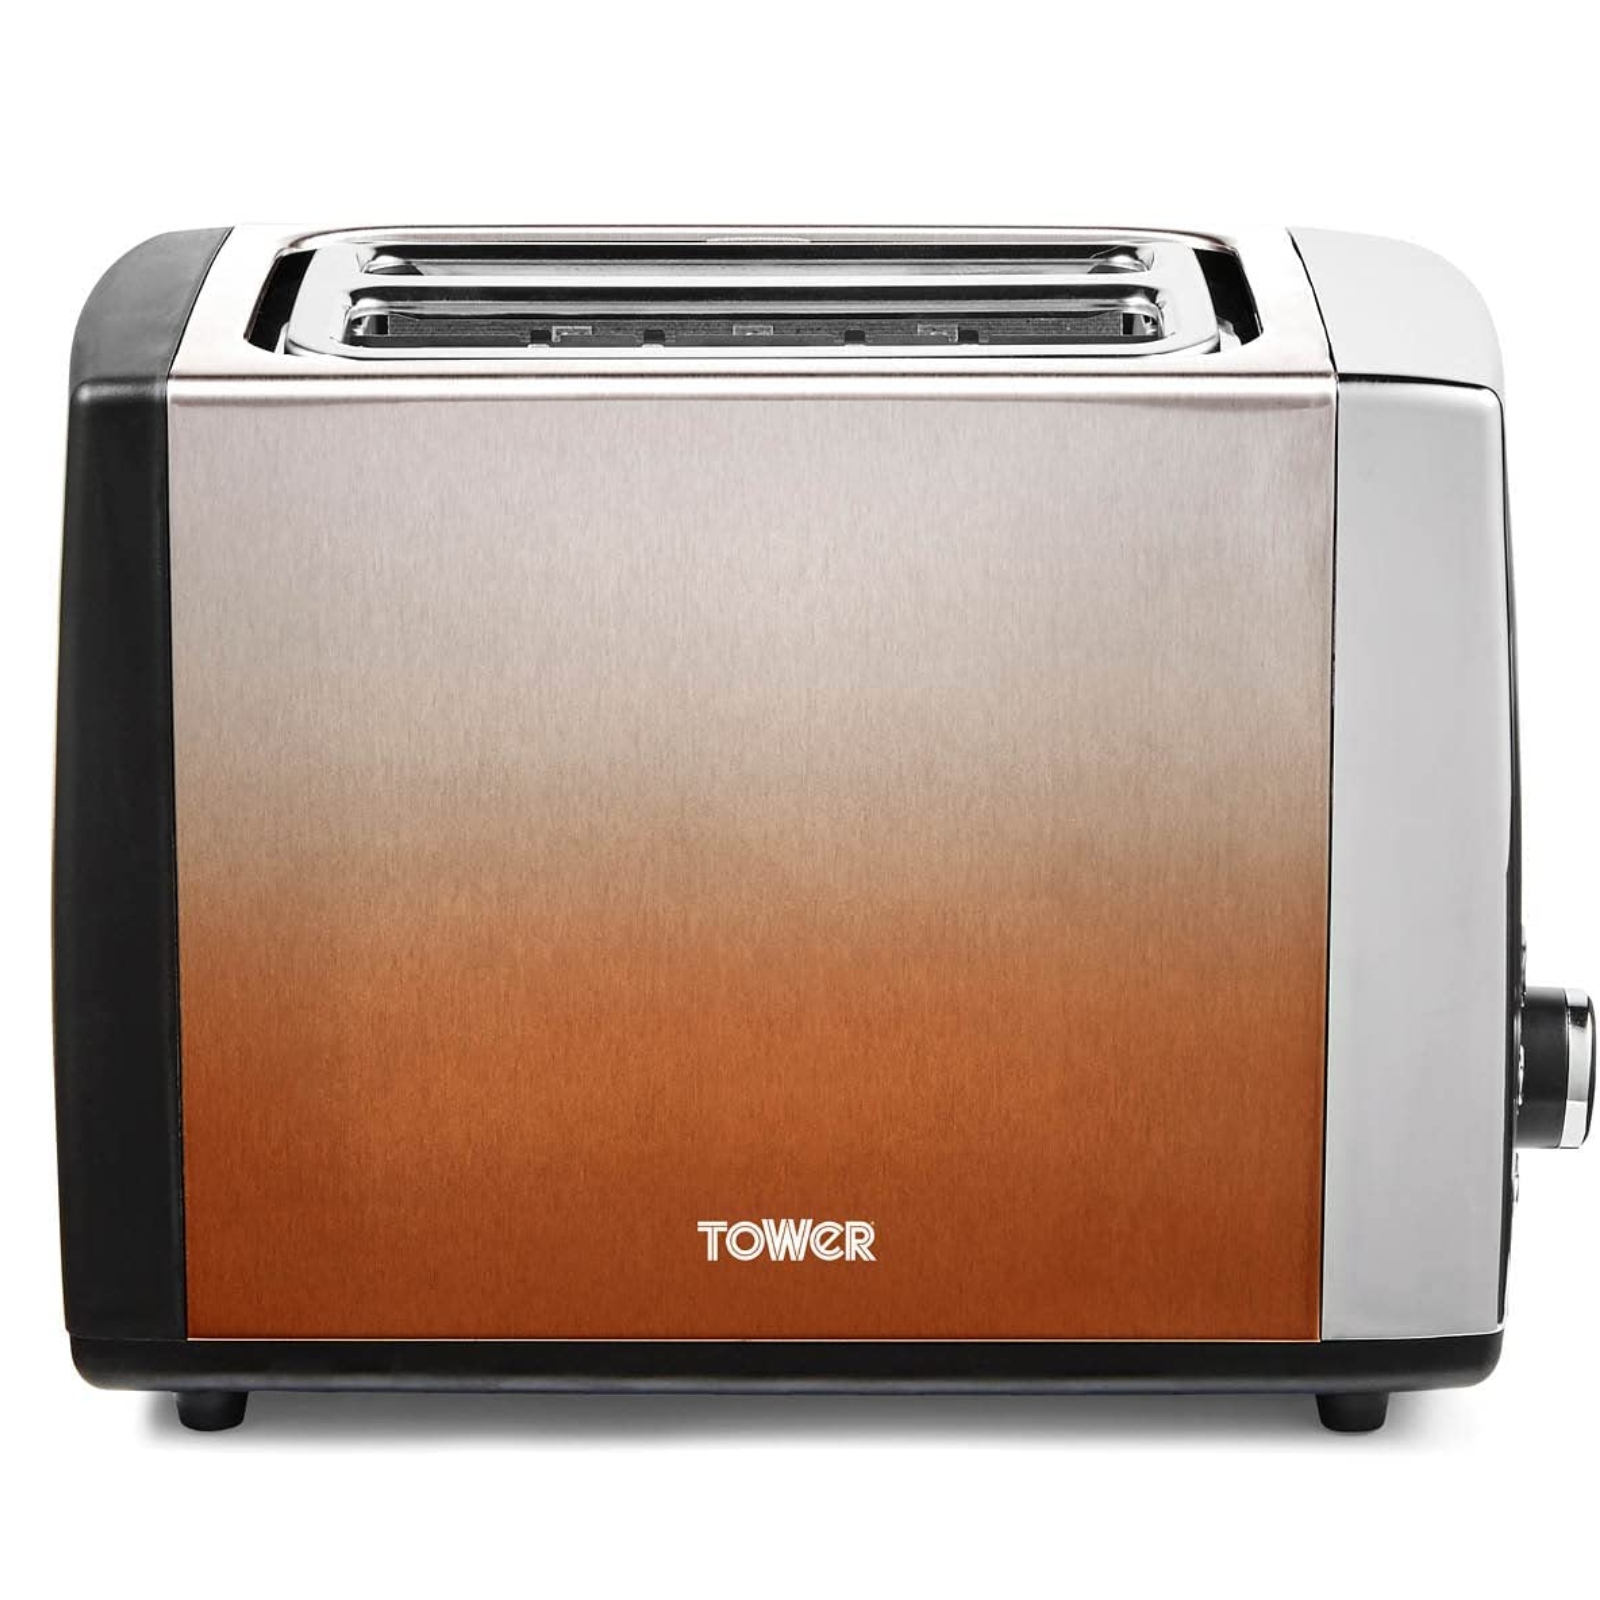 Tower T20038COP 900W 2 Slice Toaster Copper Brand New